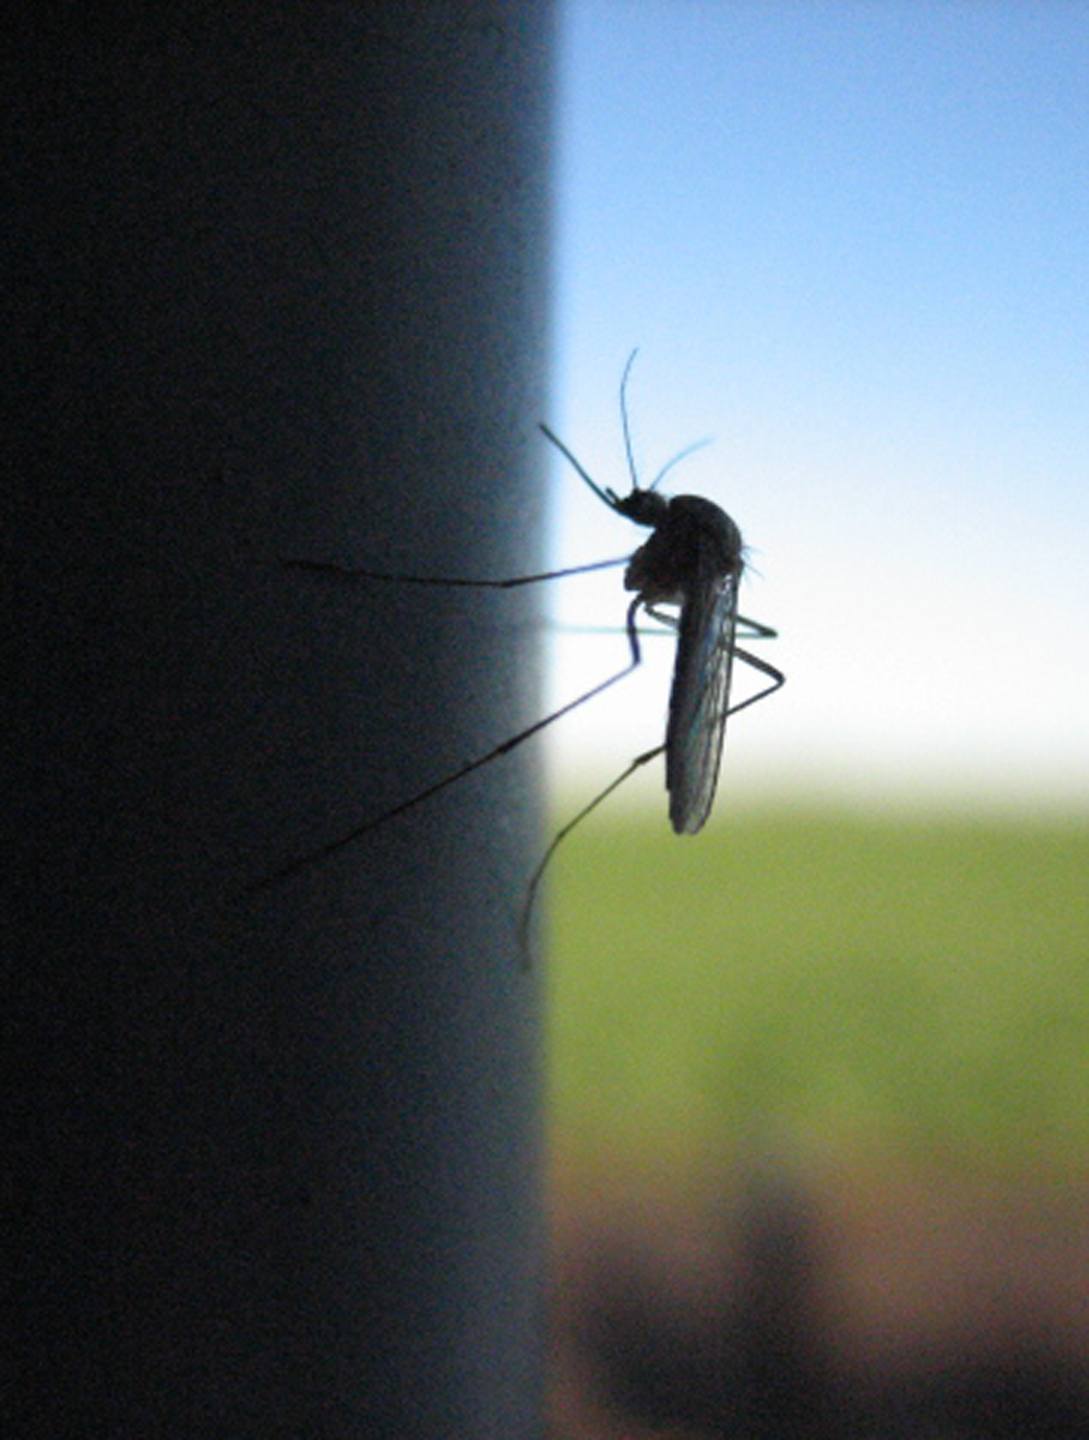 BE AWARE- This year Albertans are urged to be more aware of mosquitoes and to protect themselves from getting the West Nile virus.